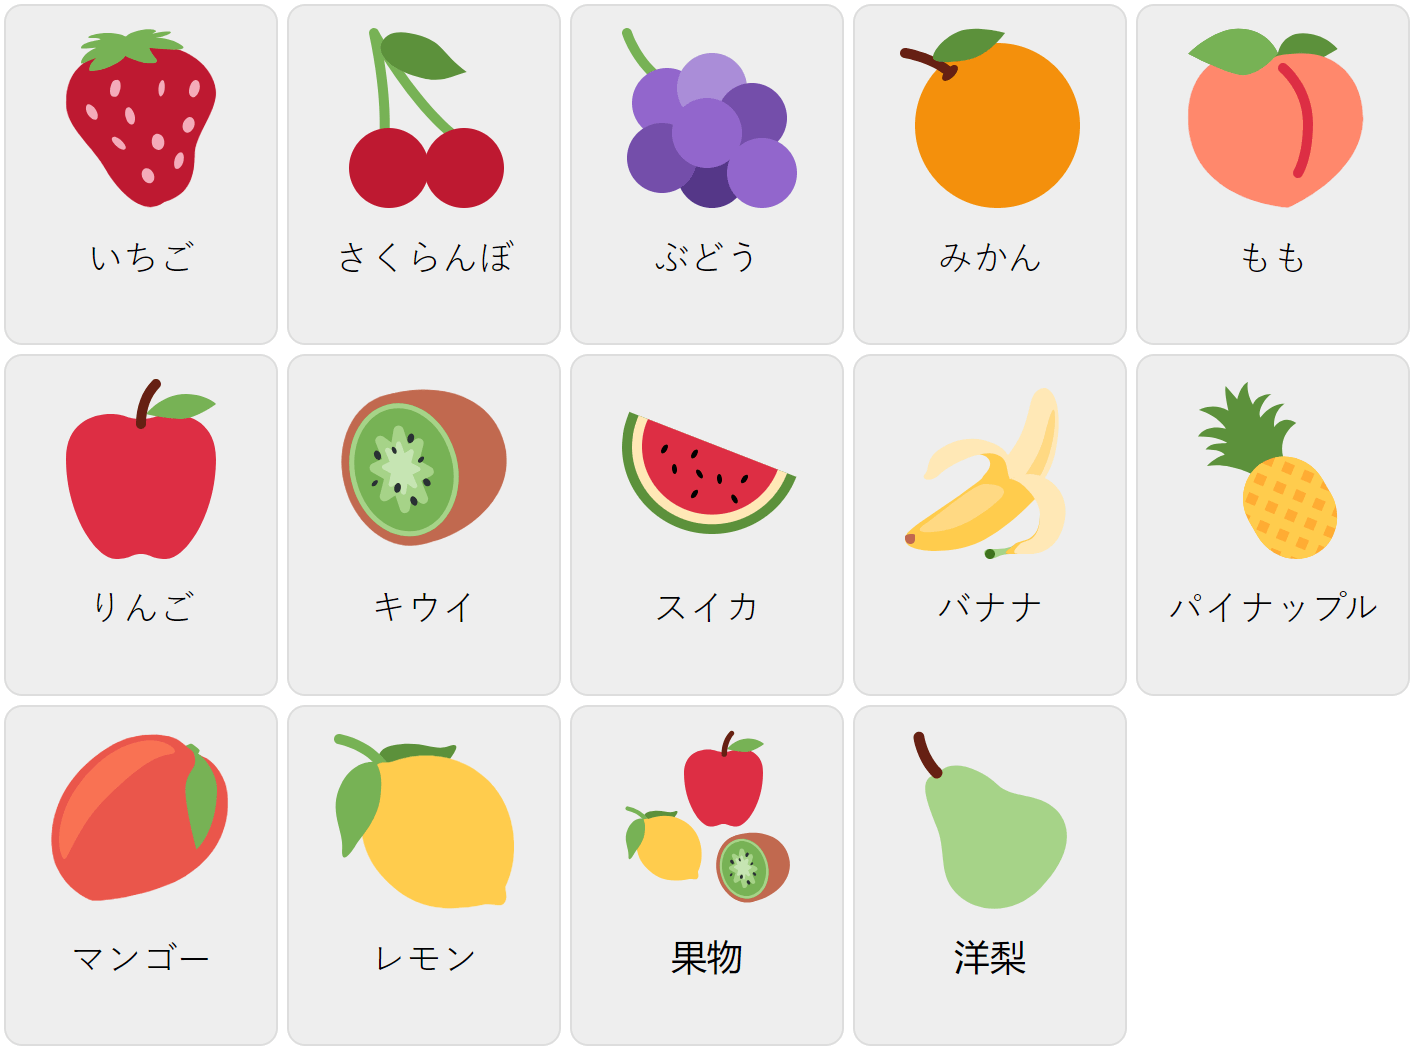 Fruits in Japanese